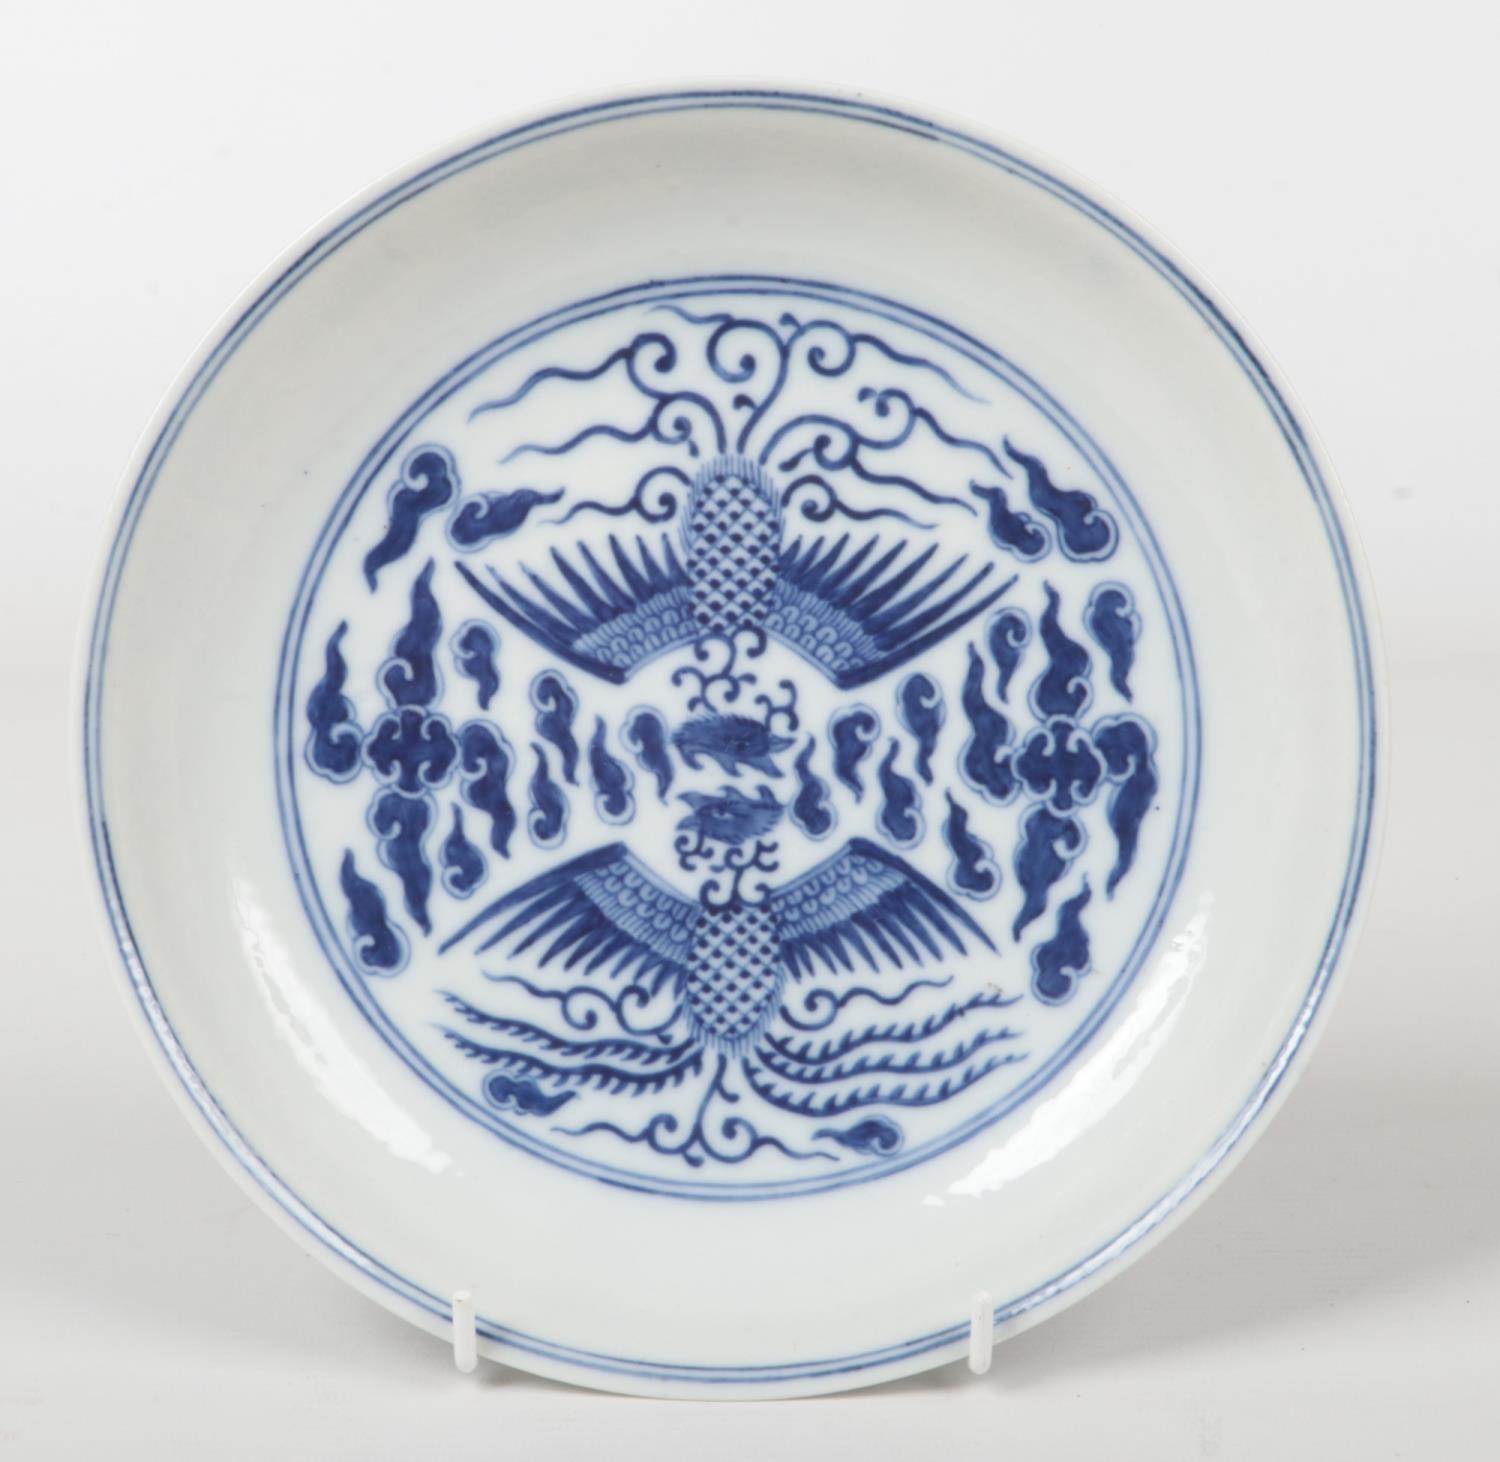 A Chinese Kangxi (1662-1722) blue and white Phoenix dish. Painted in underglaze blue with a pair